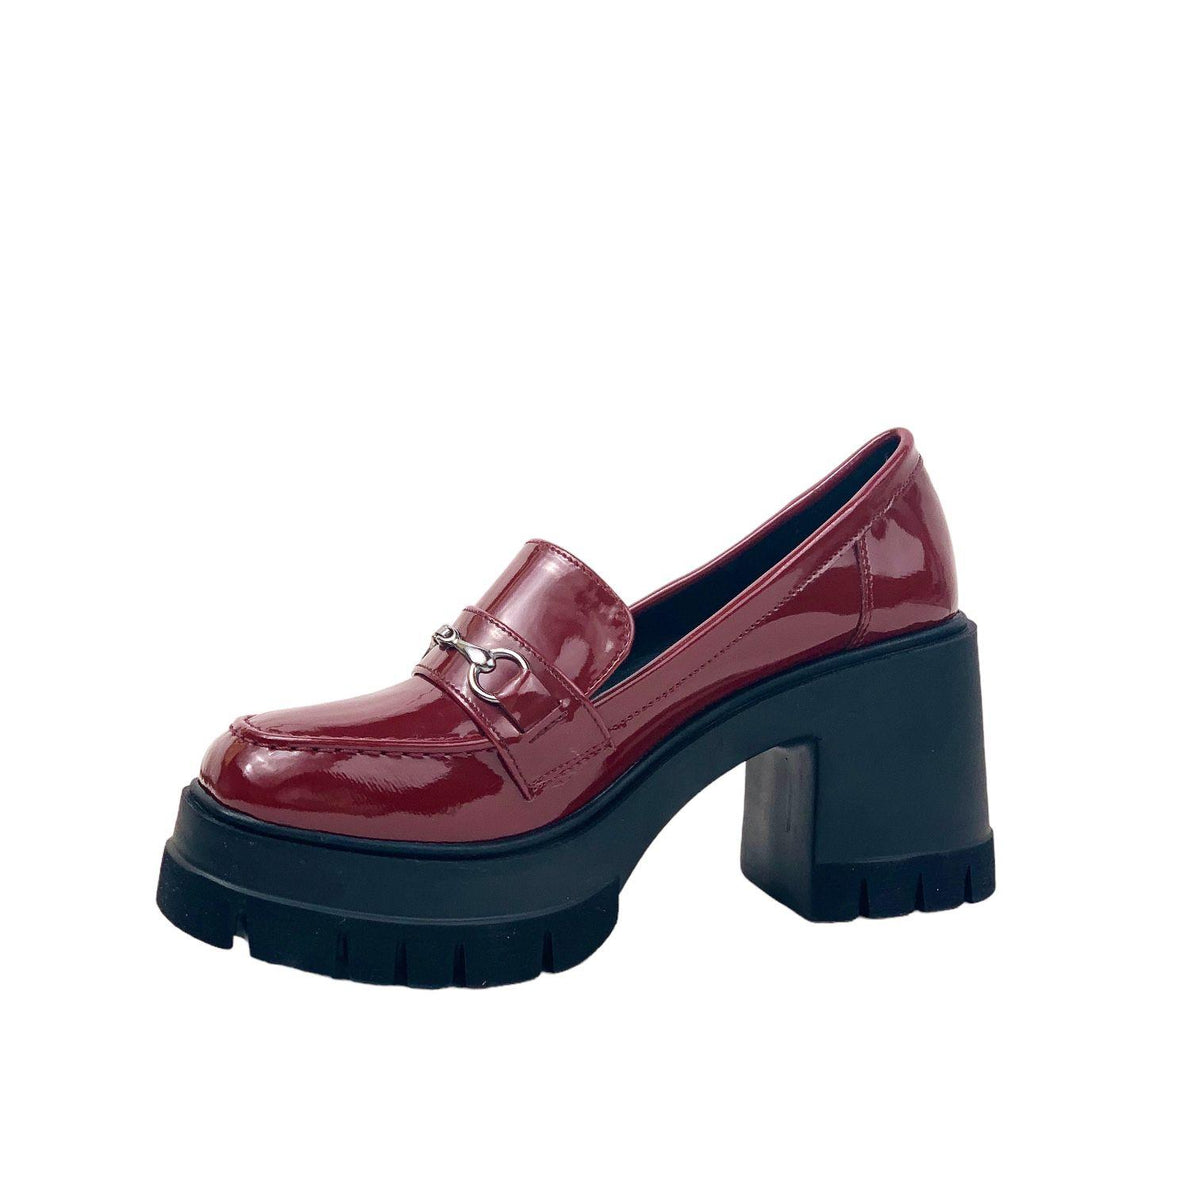 Women's Pons Bordeaux Patent Leather High Heeled Loafer Shoes 10 Cm 604 - STREETMODE™